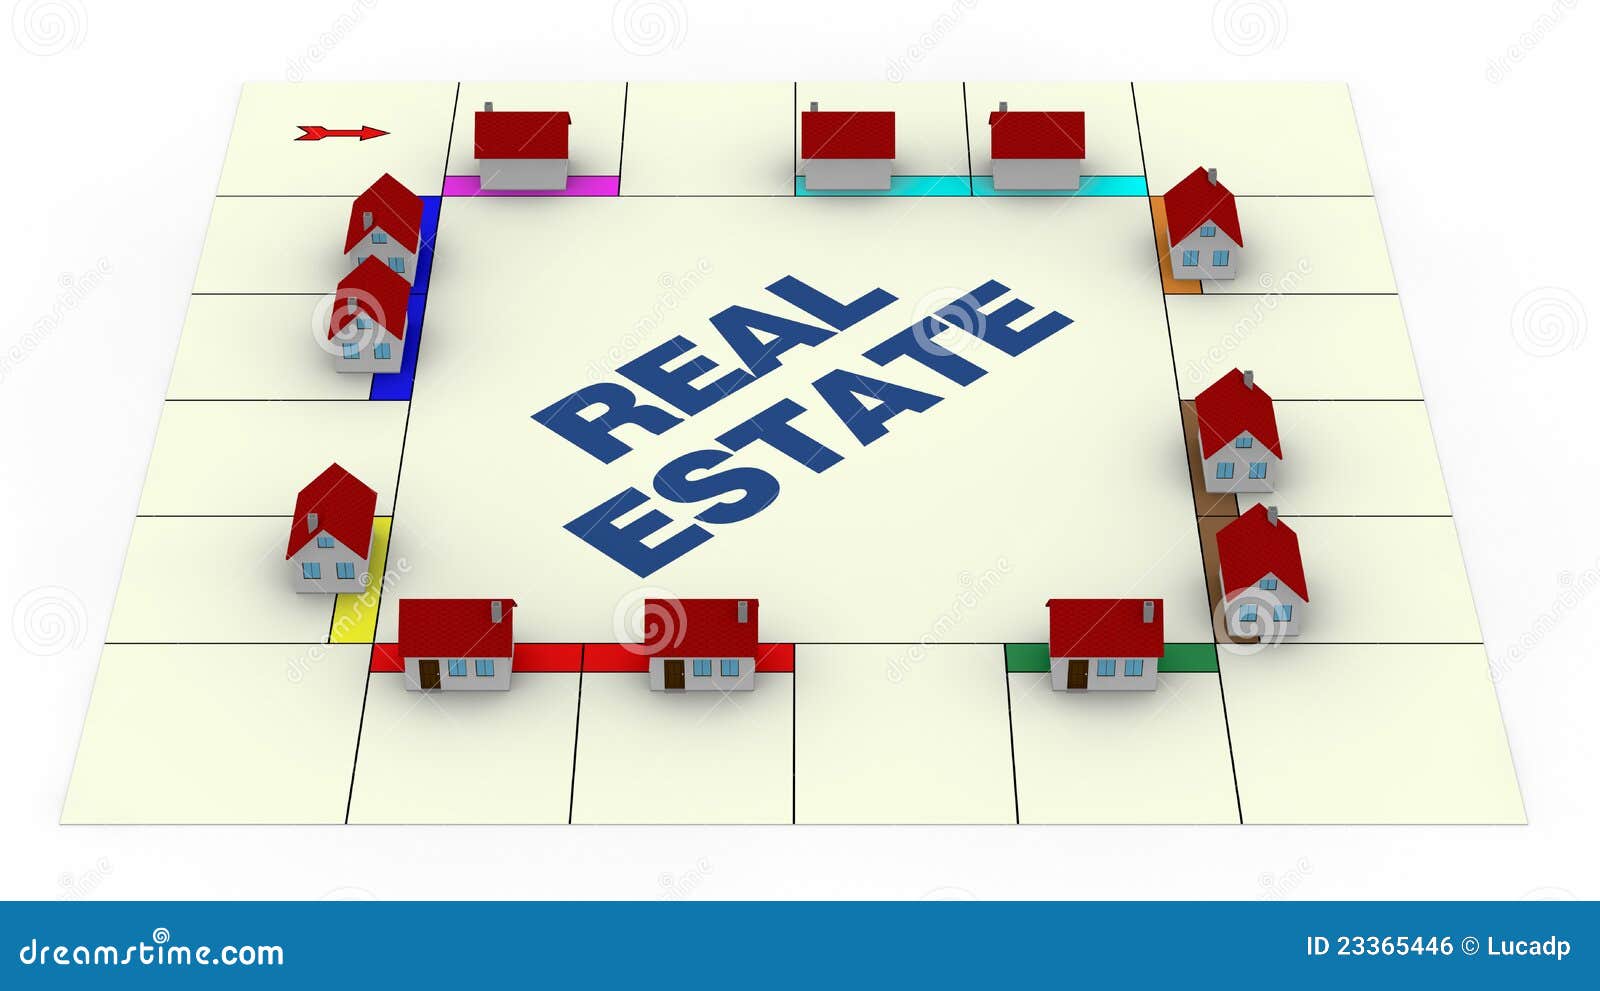 Real Estate Essays (Examples)